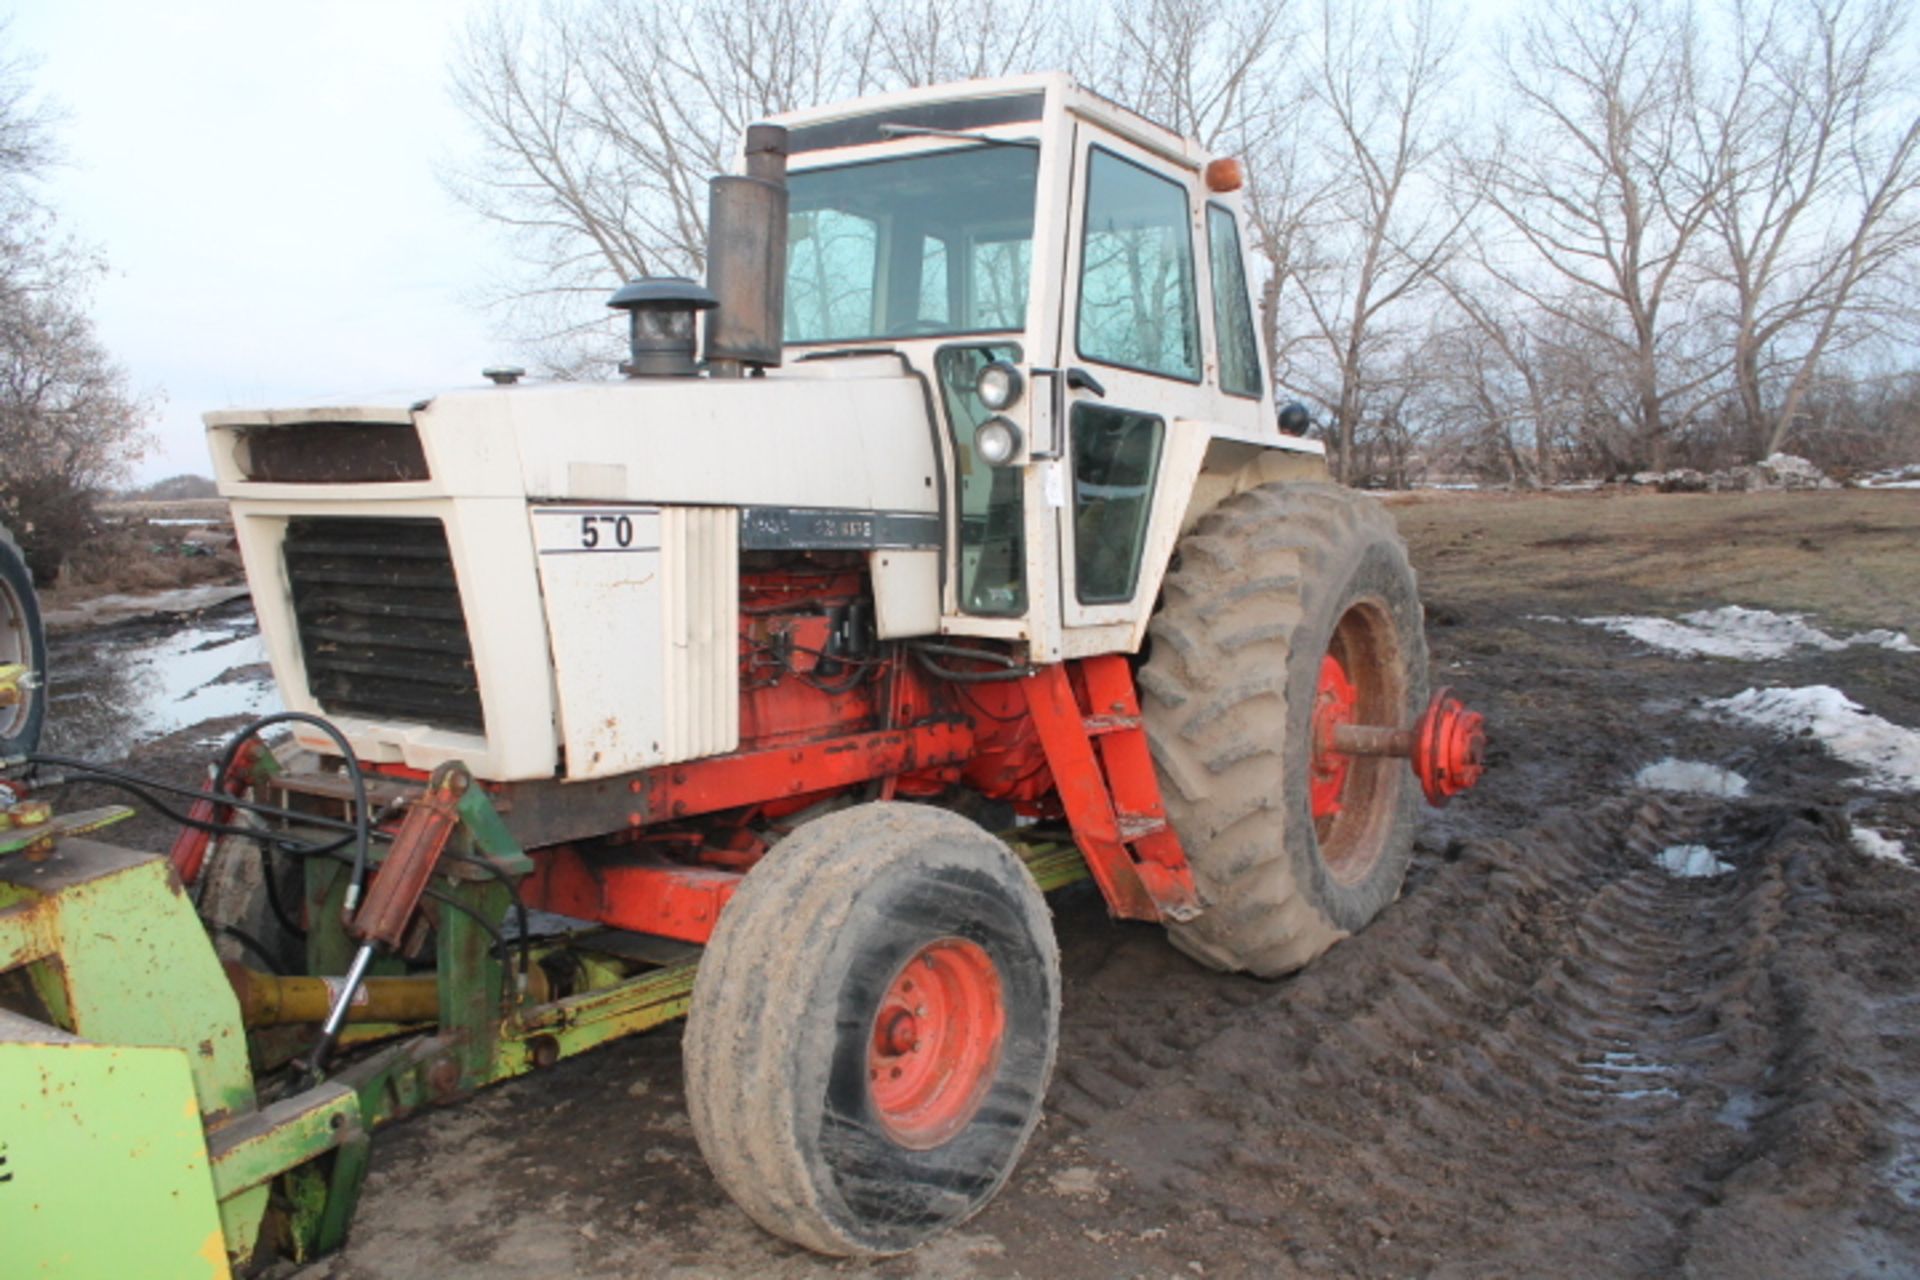 1978 Case 1570, 2 hyds, PTO, 20.8x38 good tires, PS trans.,  showing 6569hrs, SN 8819944 NOTE - Image 2 of 10